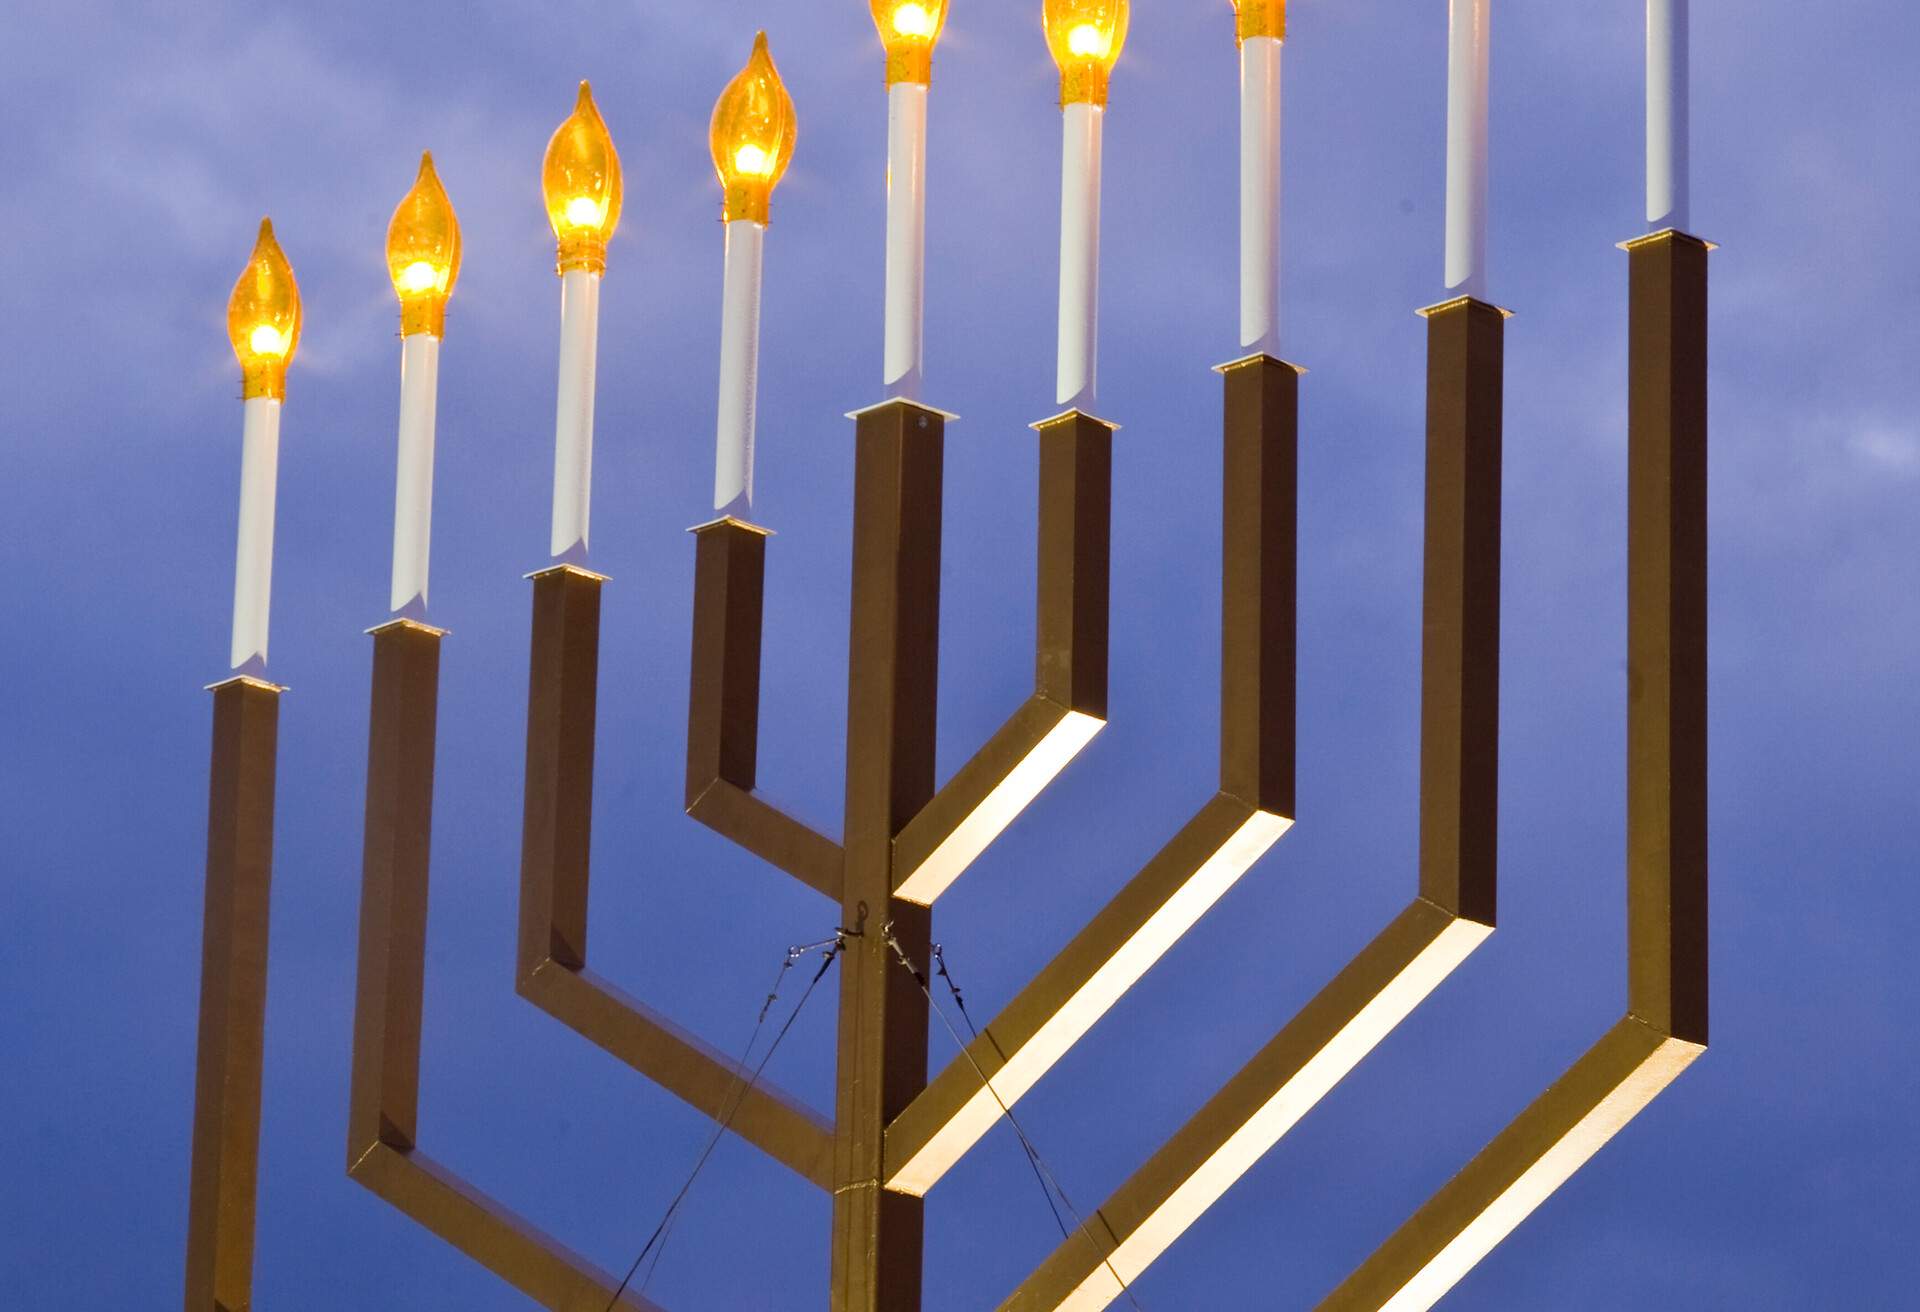 The National Hannukah menorah is lit in President's Park, outside the White House, in Washington D.C. The National Menorah has been lit for Hanukkah celebrations every year since 1979.